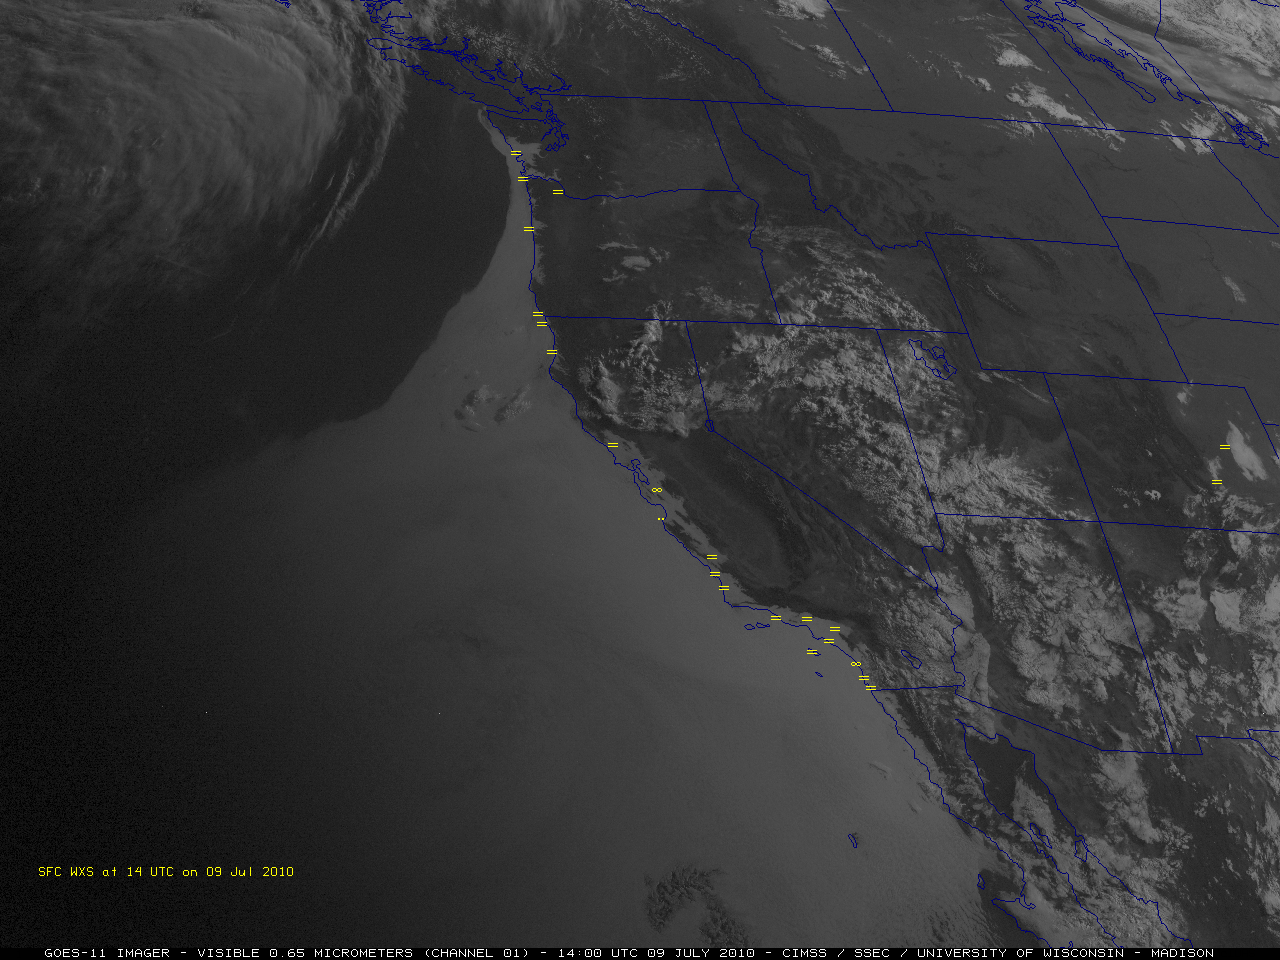 GOES-11 0.65 Âµm visible channel images